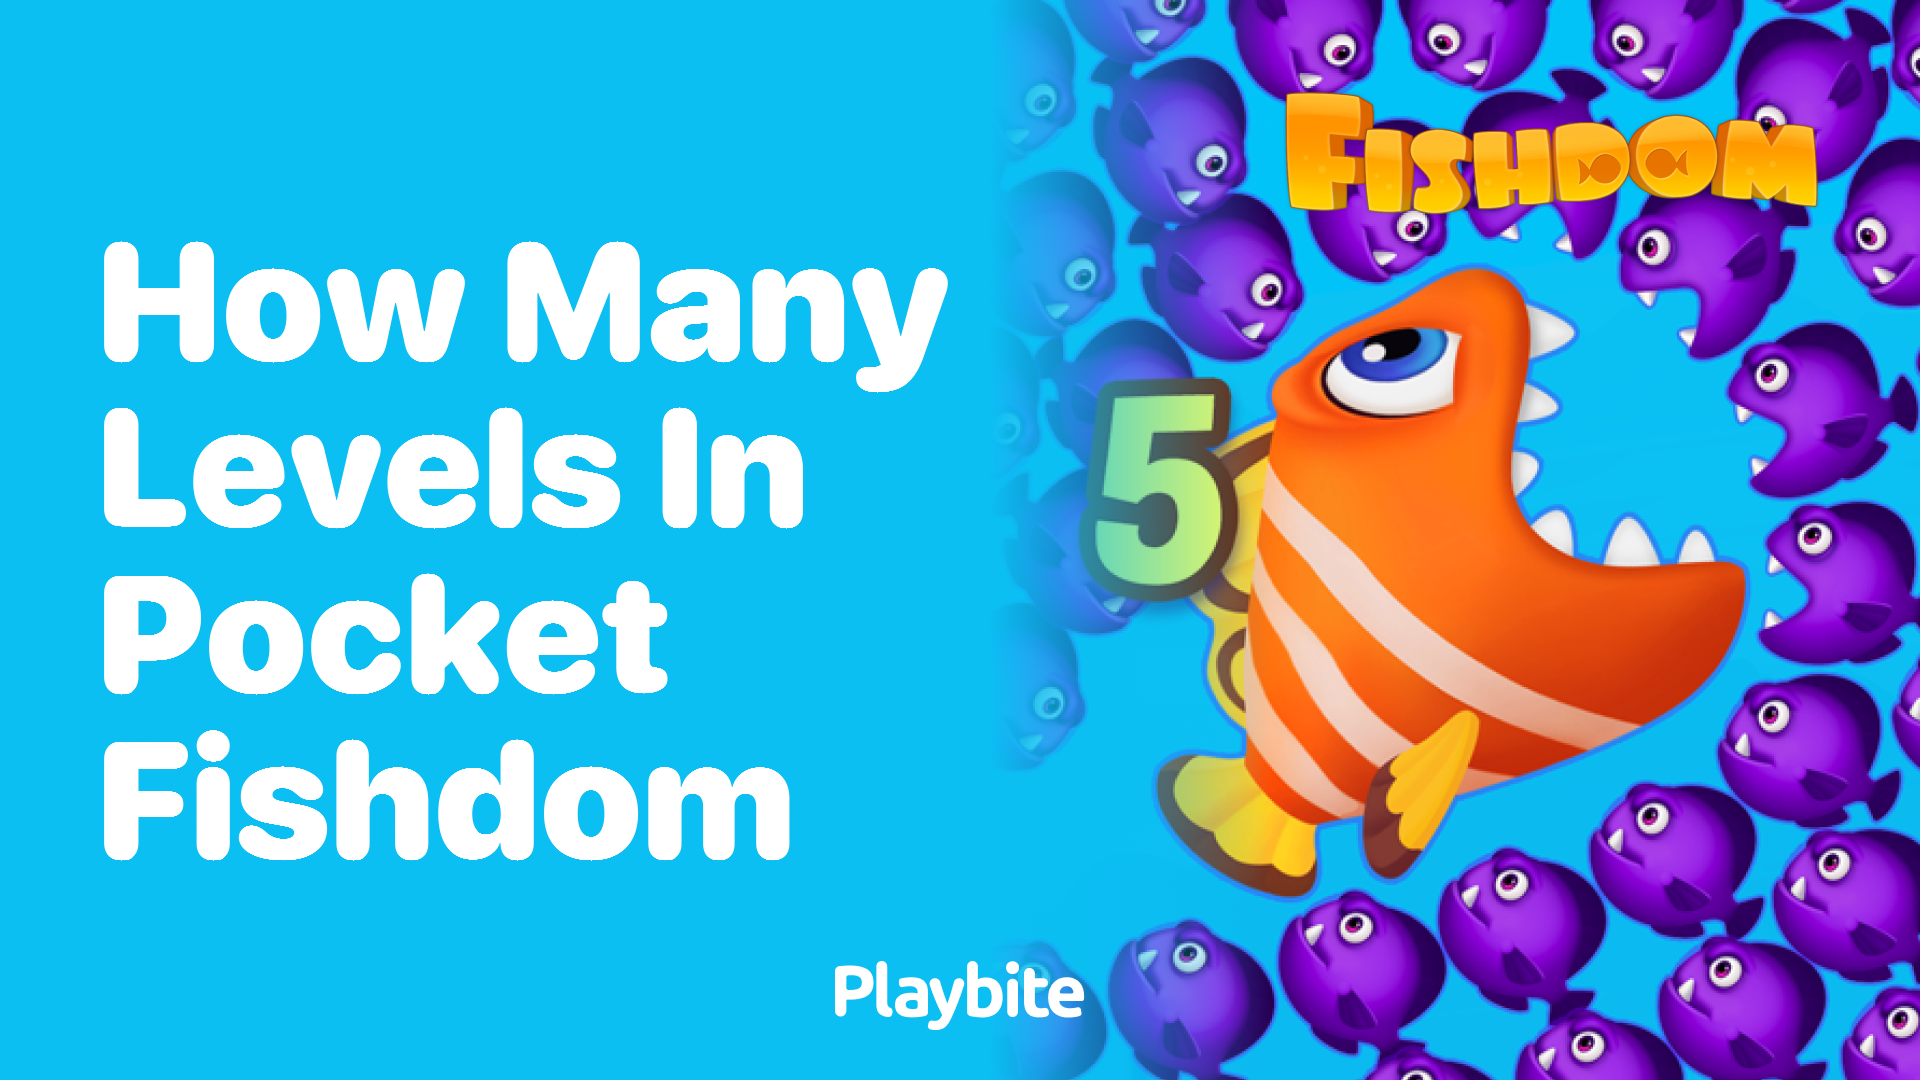 How Many Levels Are in Pocket Fishdom?